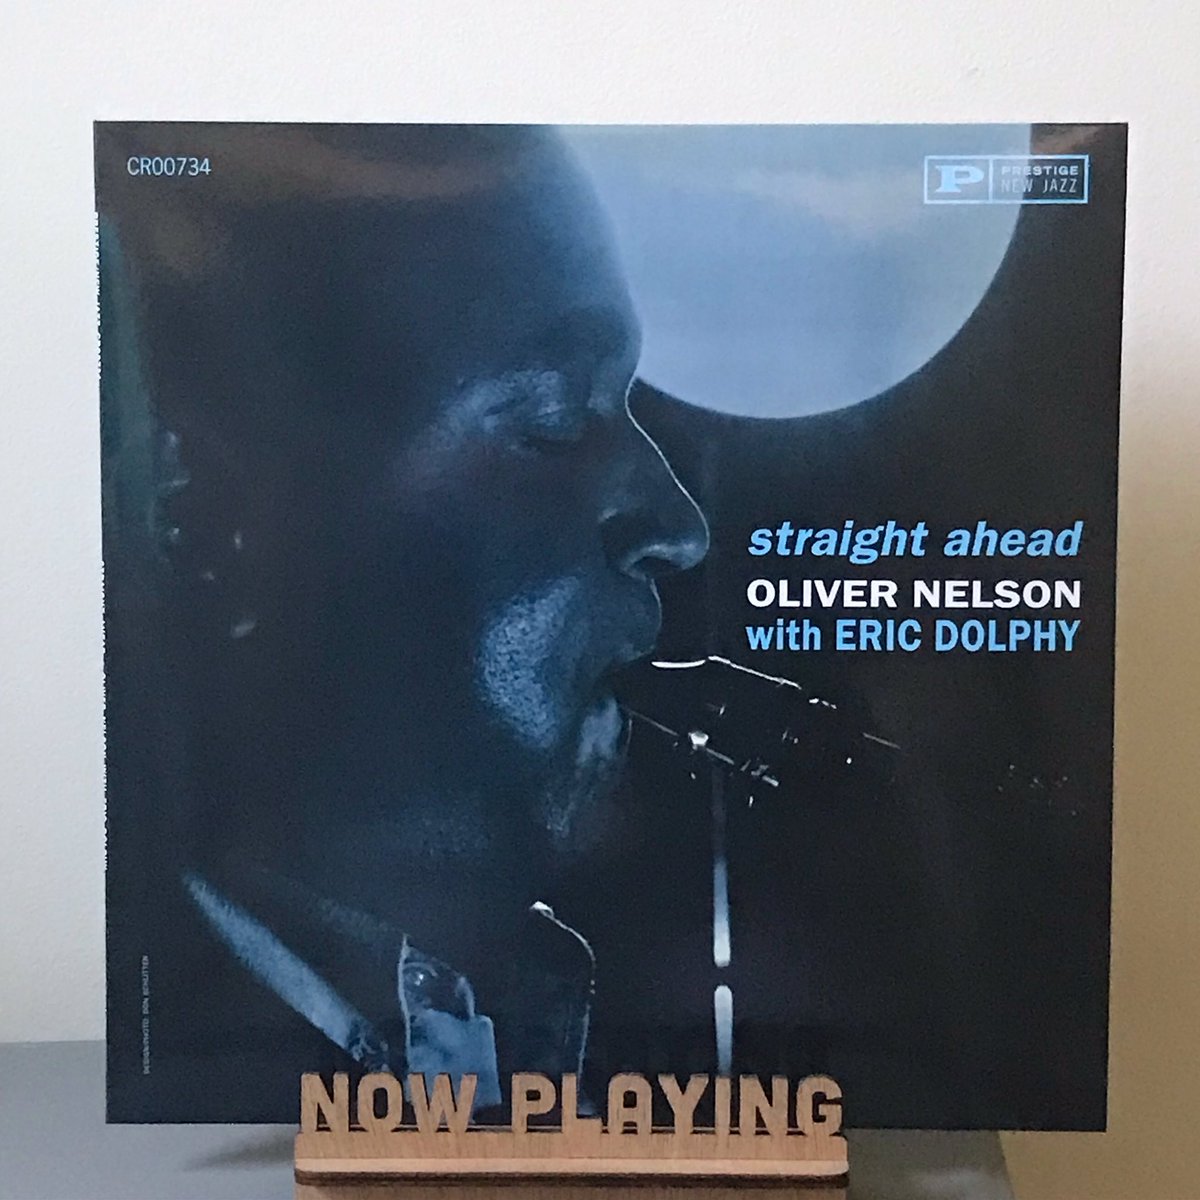 I love a good horn duet.

Now Playing: Oliver Nelson with Eric Dolphy “Straight Ahead” (1961; 2024 @VinylMePlease release).

#vinyl #vinylrecords #vinylcollection #vinylcollector #vinylcommunity #vinyladdict #vinylcollectionpost #vinilo #vinilos #olivernelson #jazz #hardbop